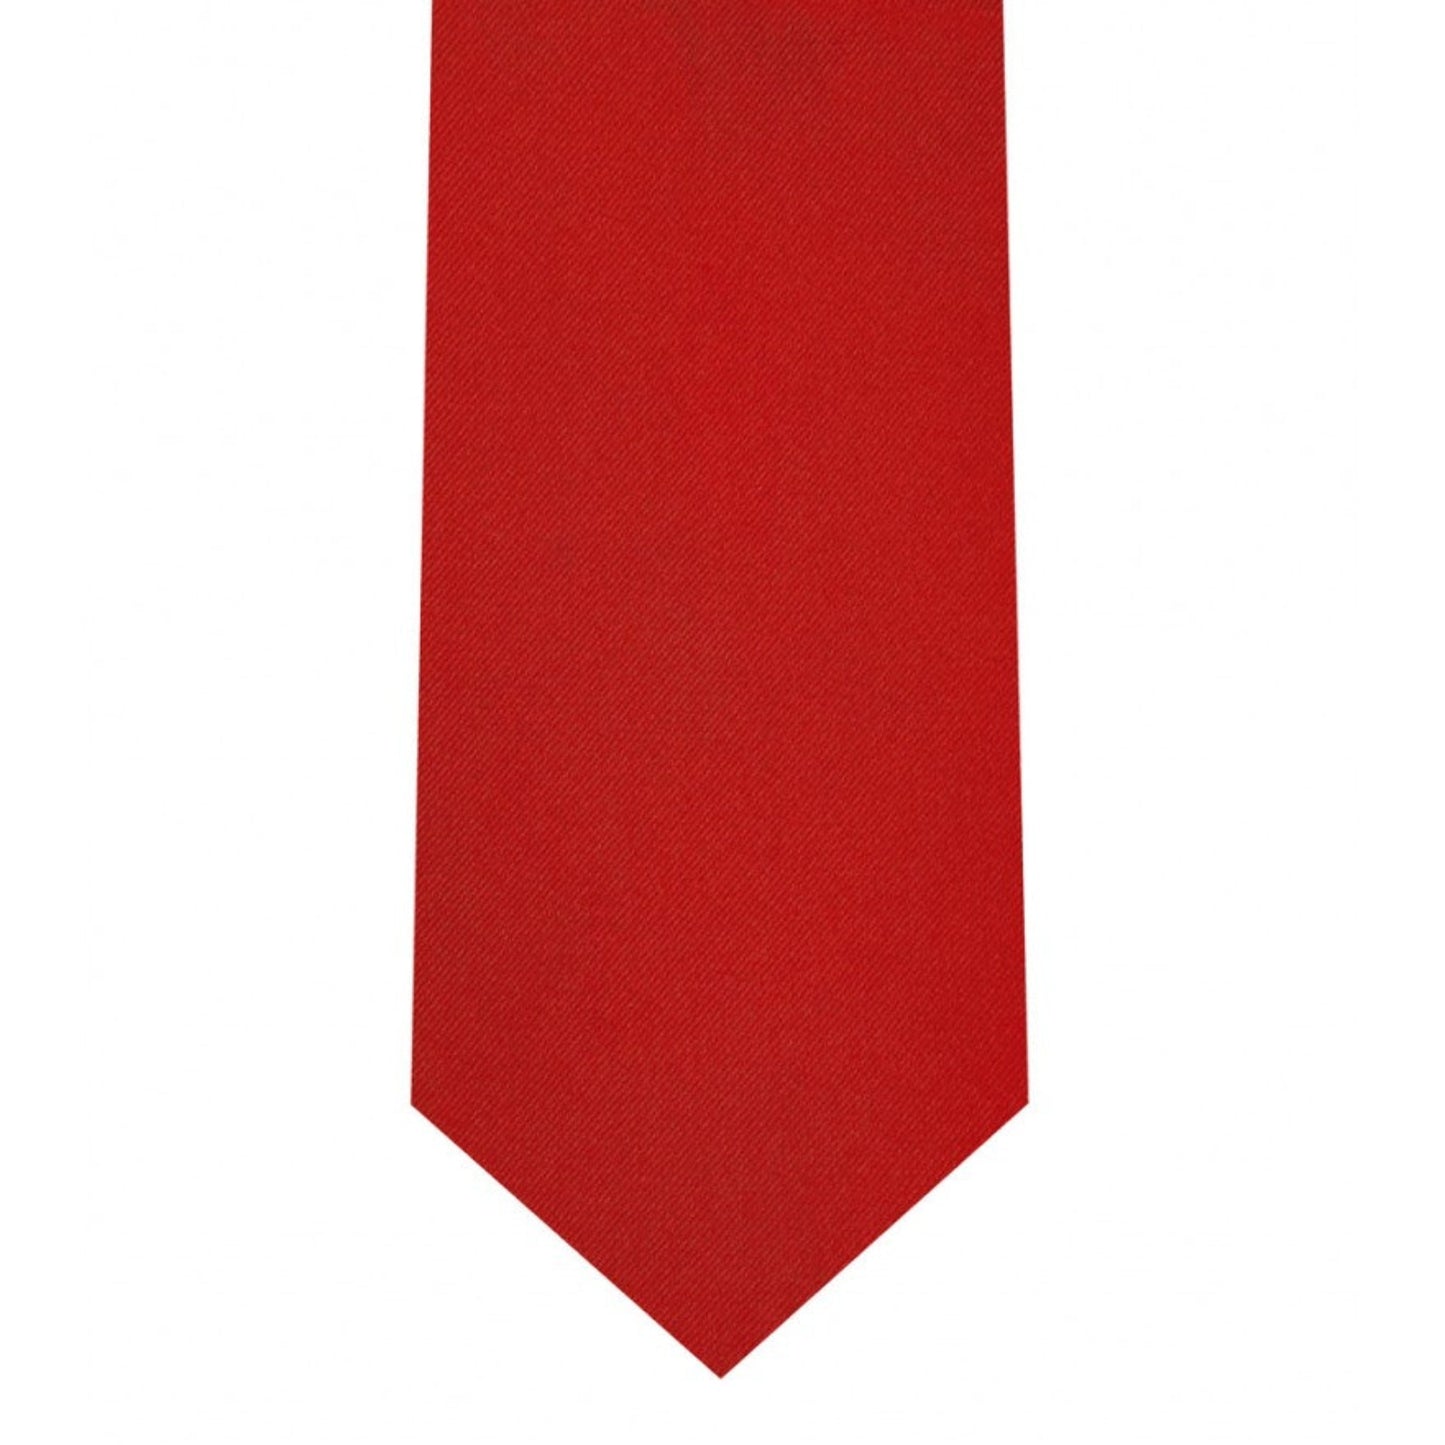 Classic True Red Tie Skinny width 2.75 inches With Matching Pocket Square | KCT Menswear